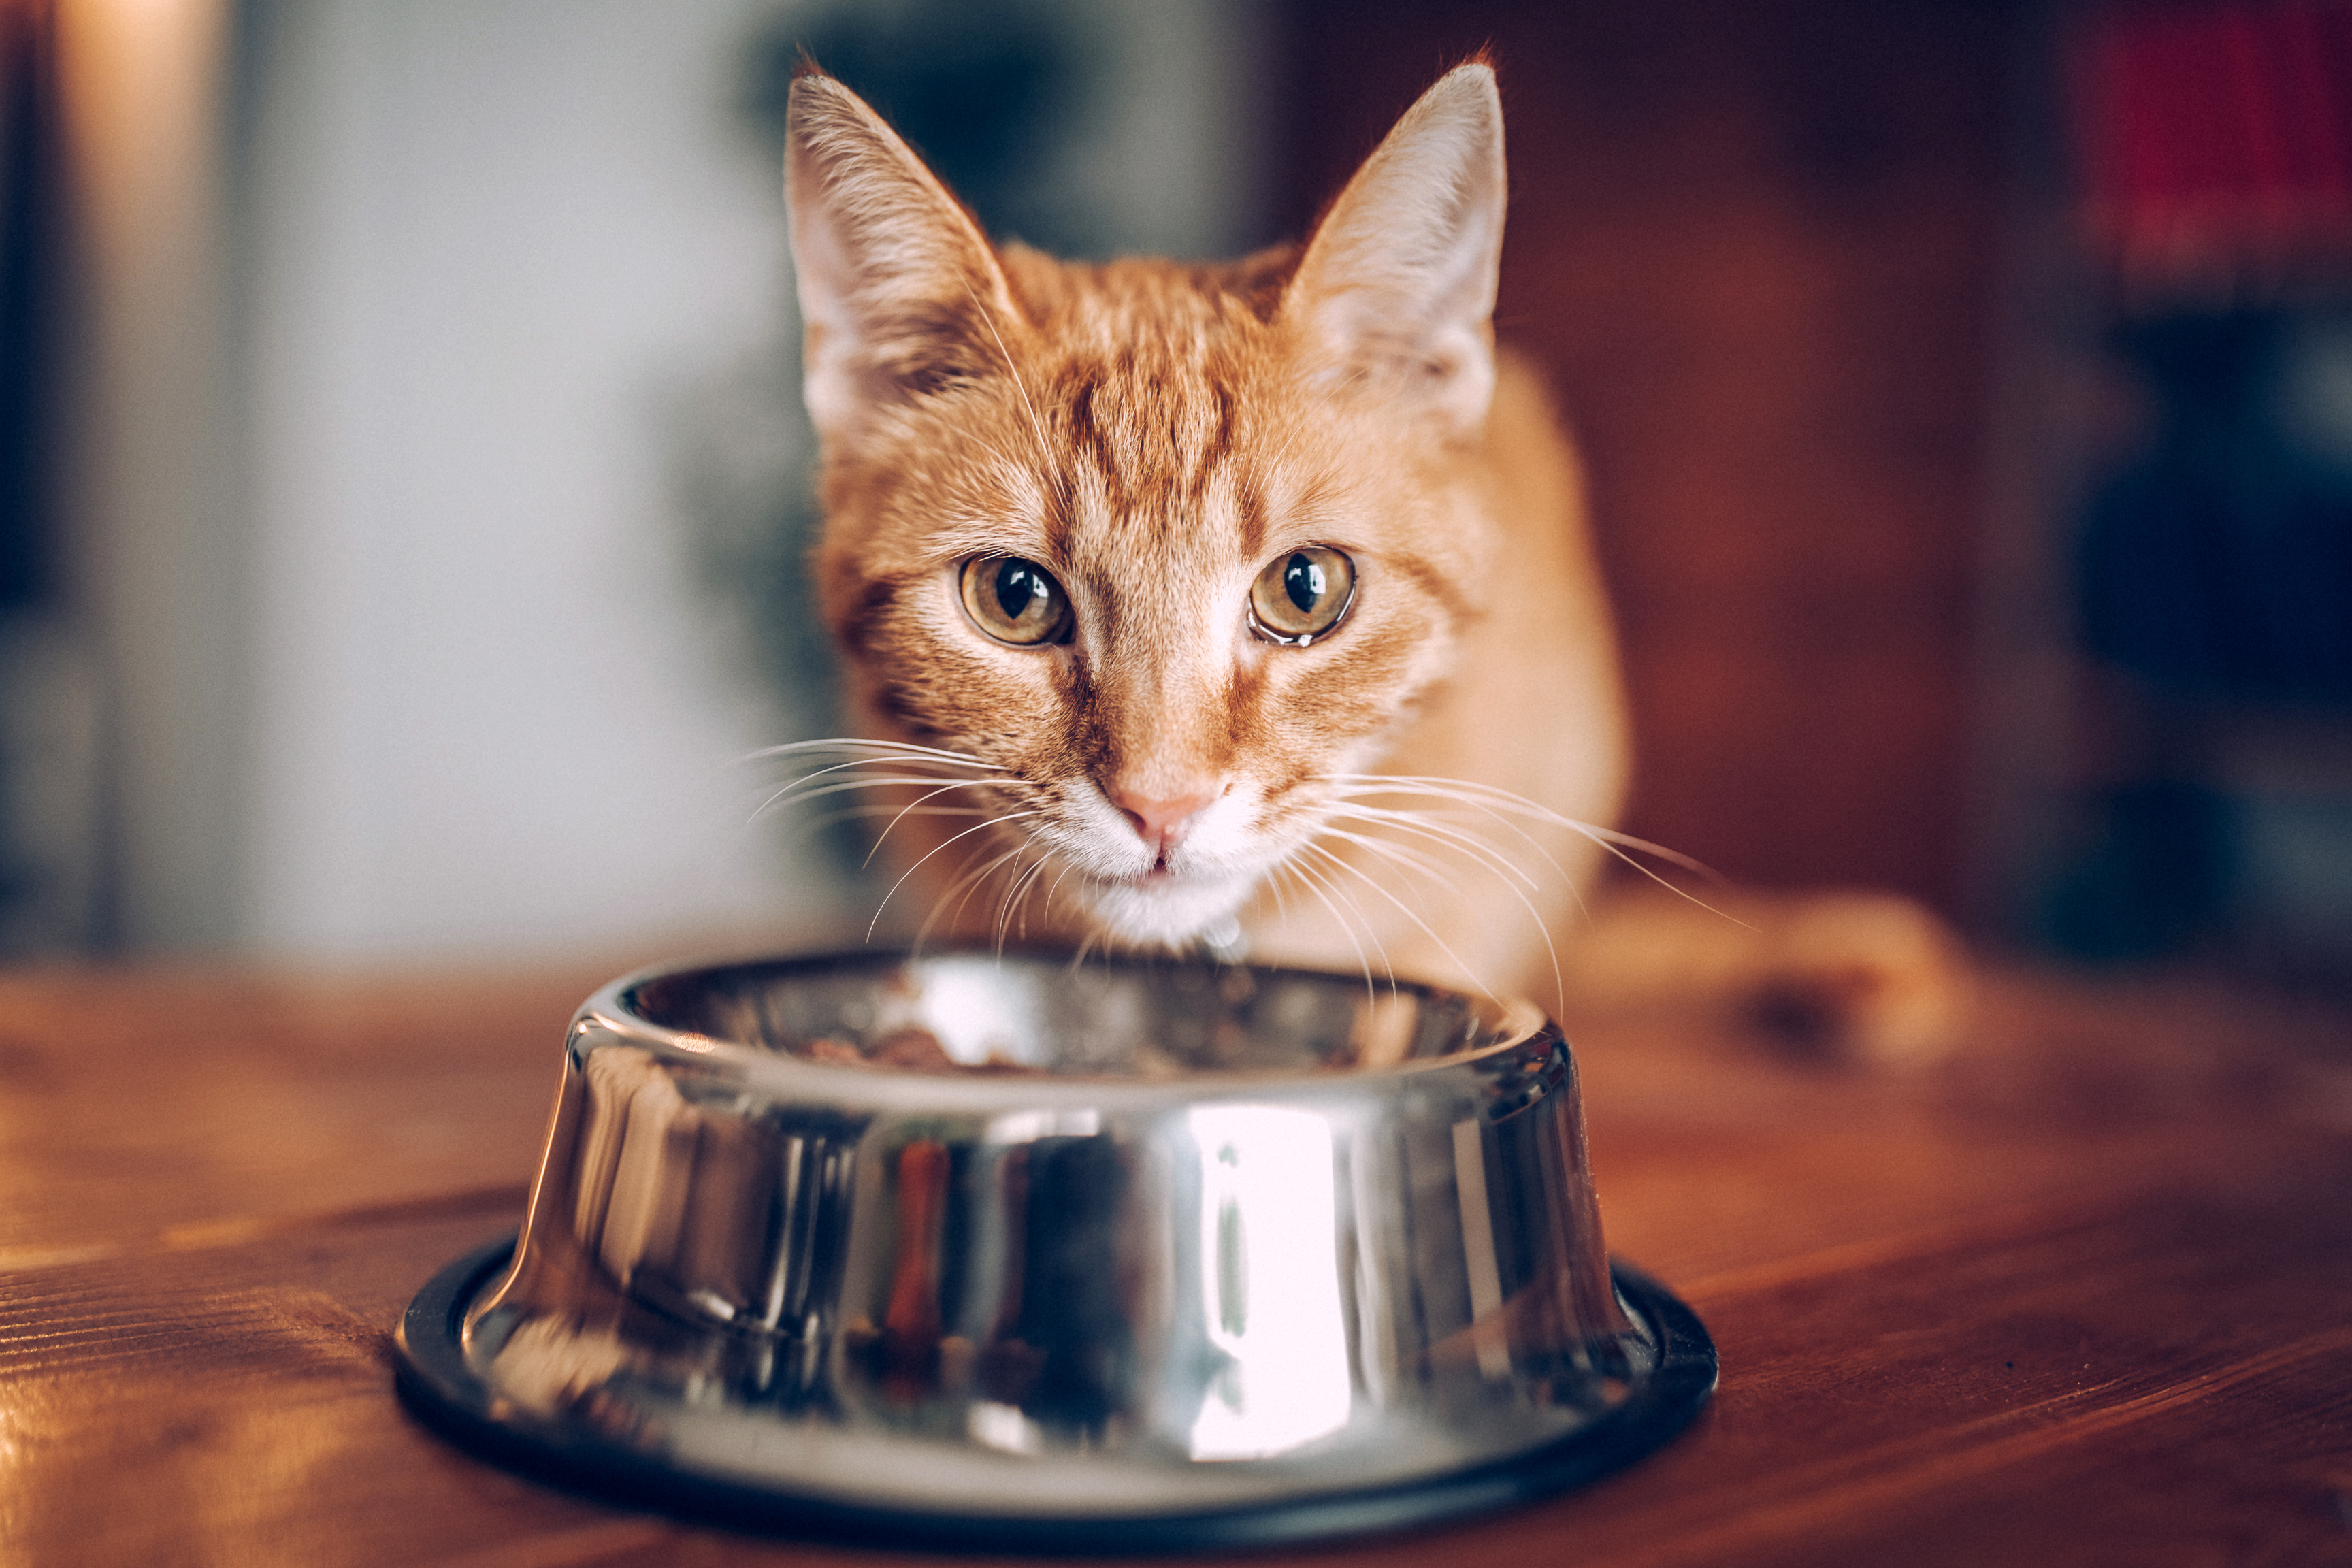 cat with a stainless food bowl